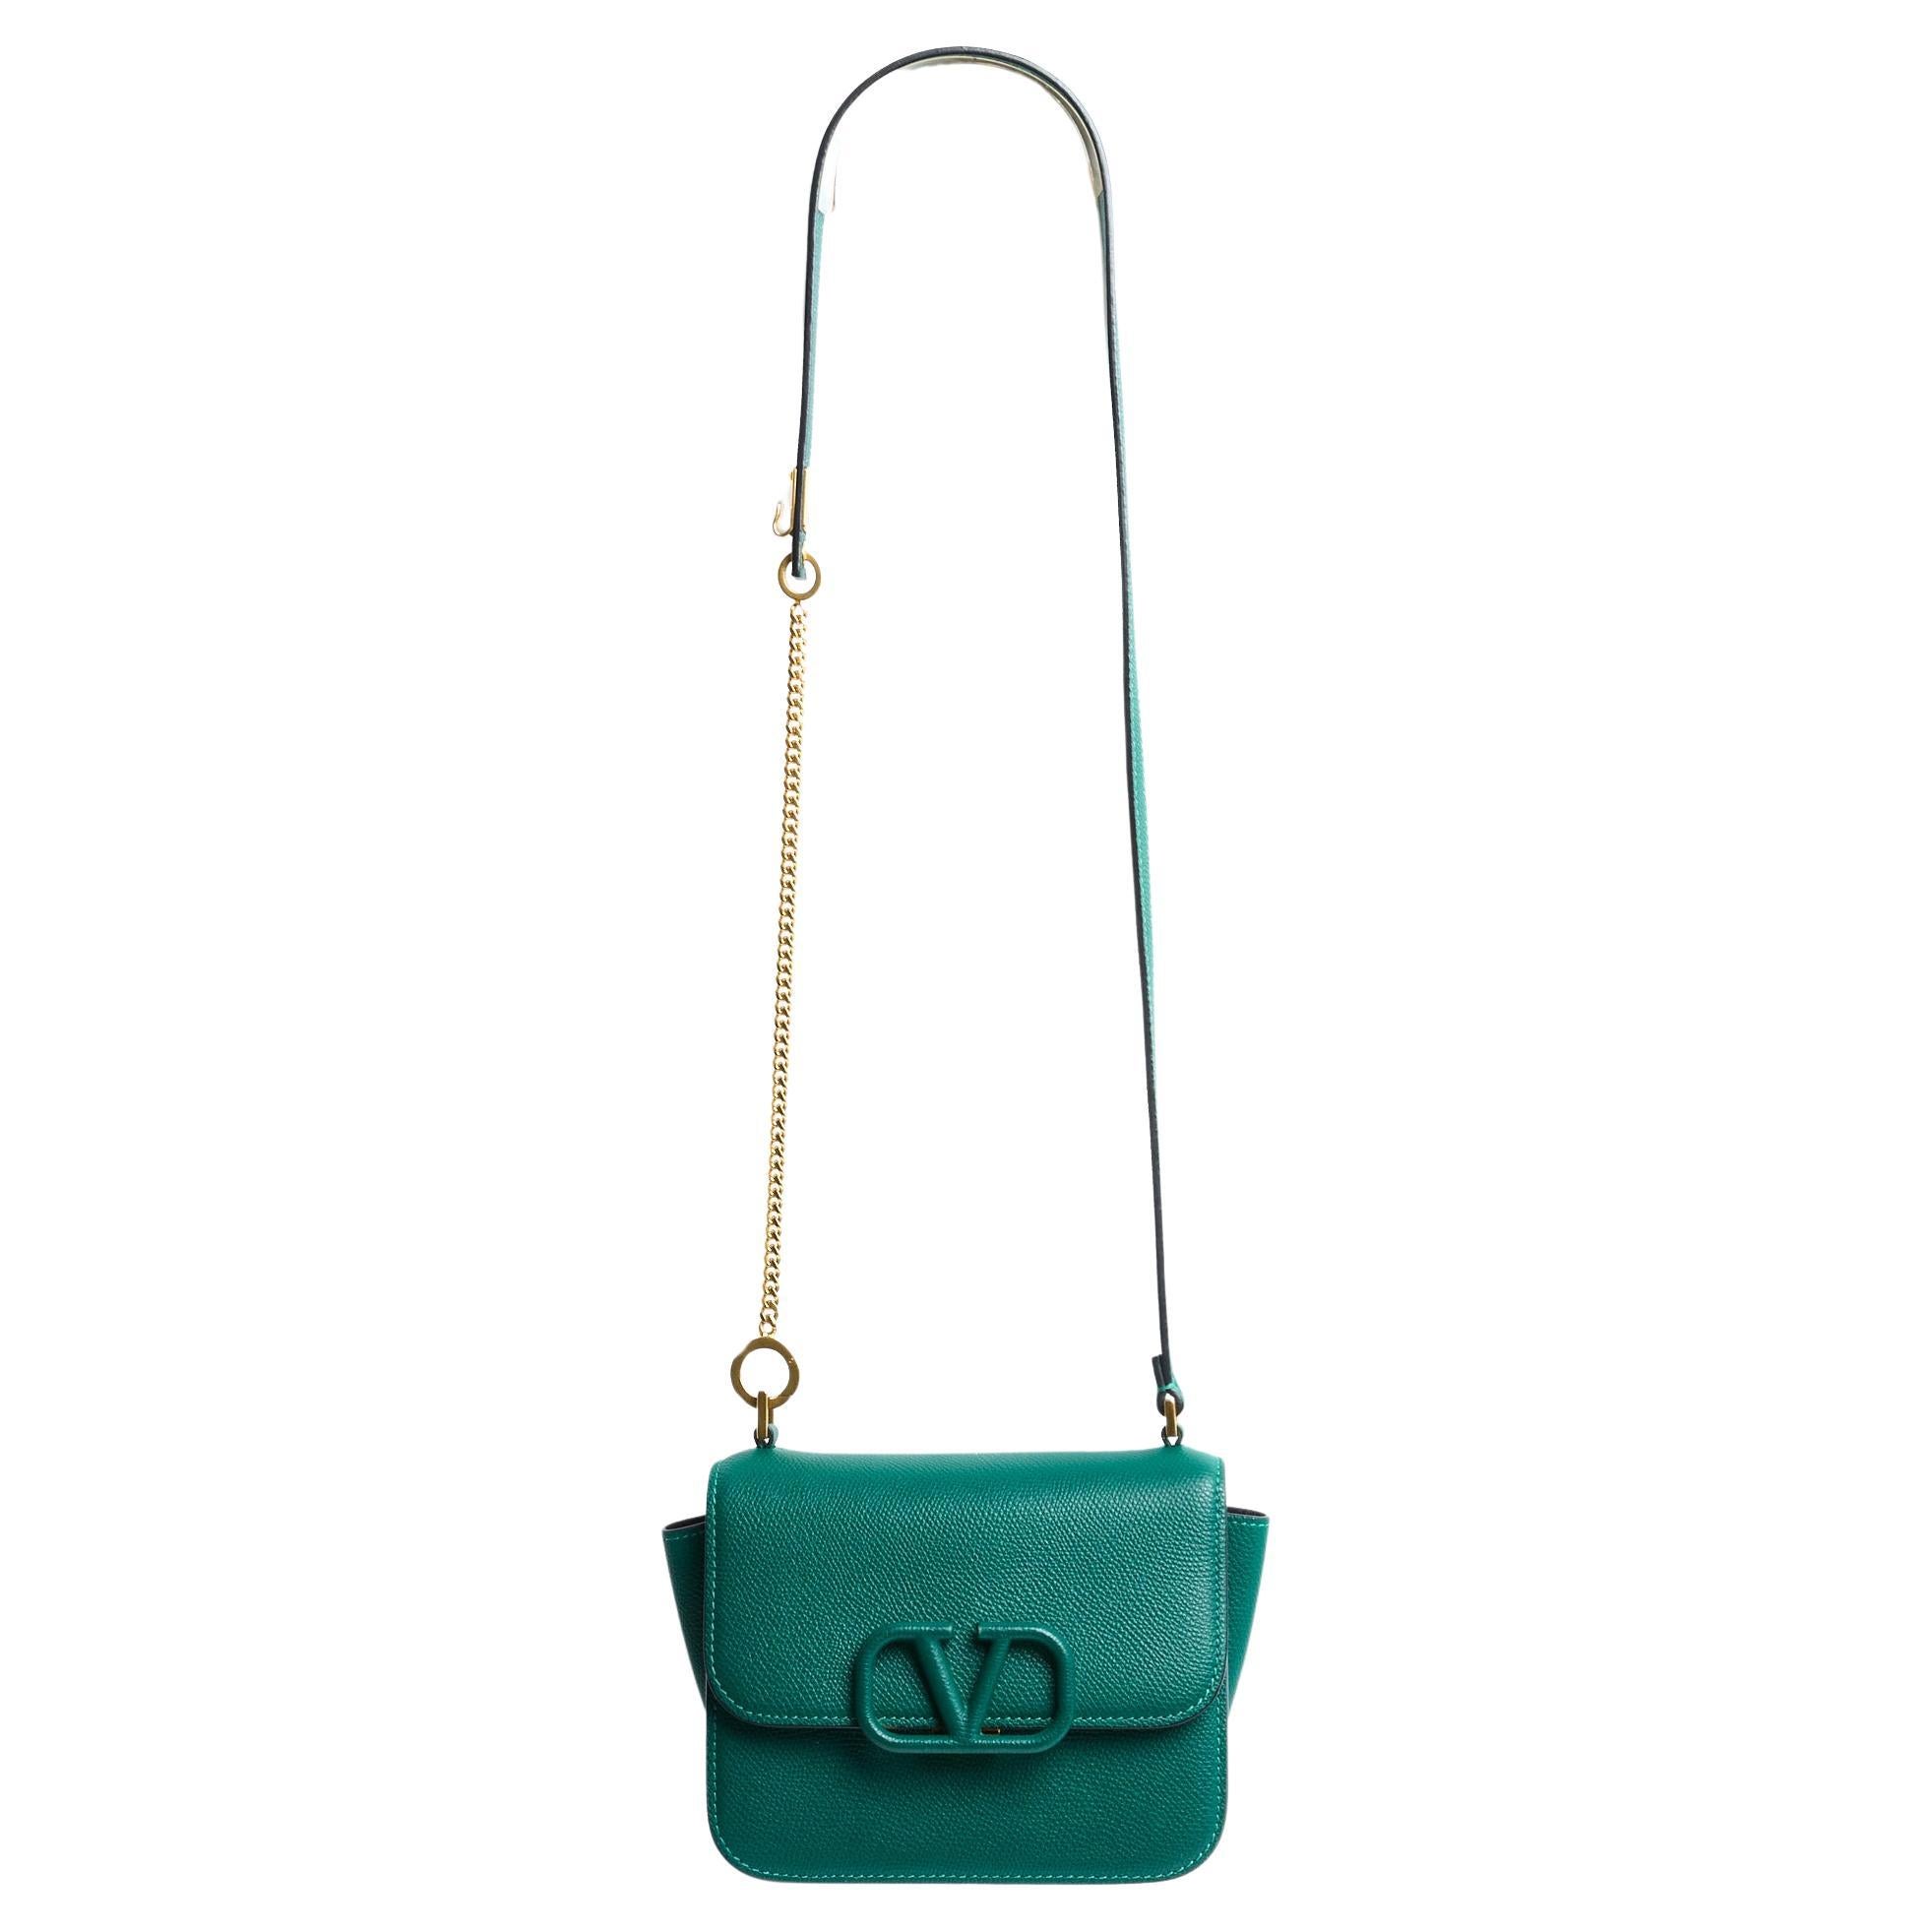 2020 Valentino VLogo green leather small bag For Sale